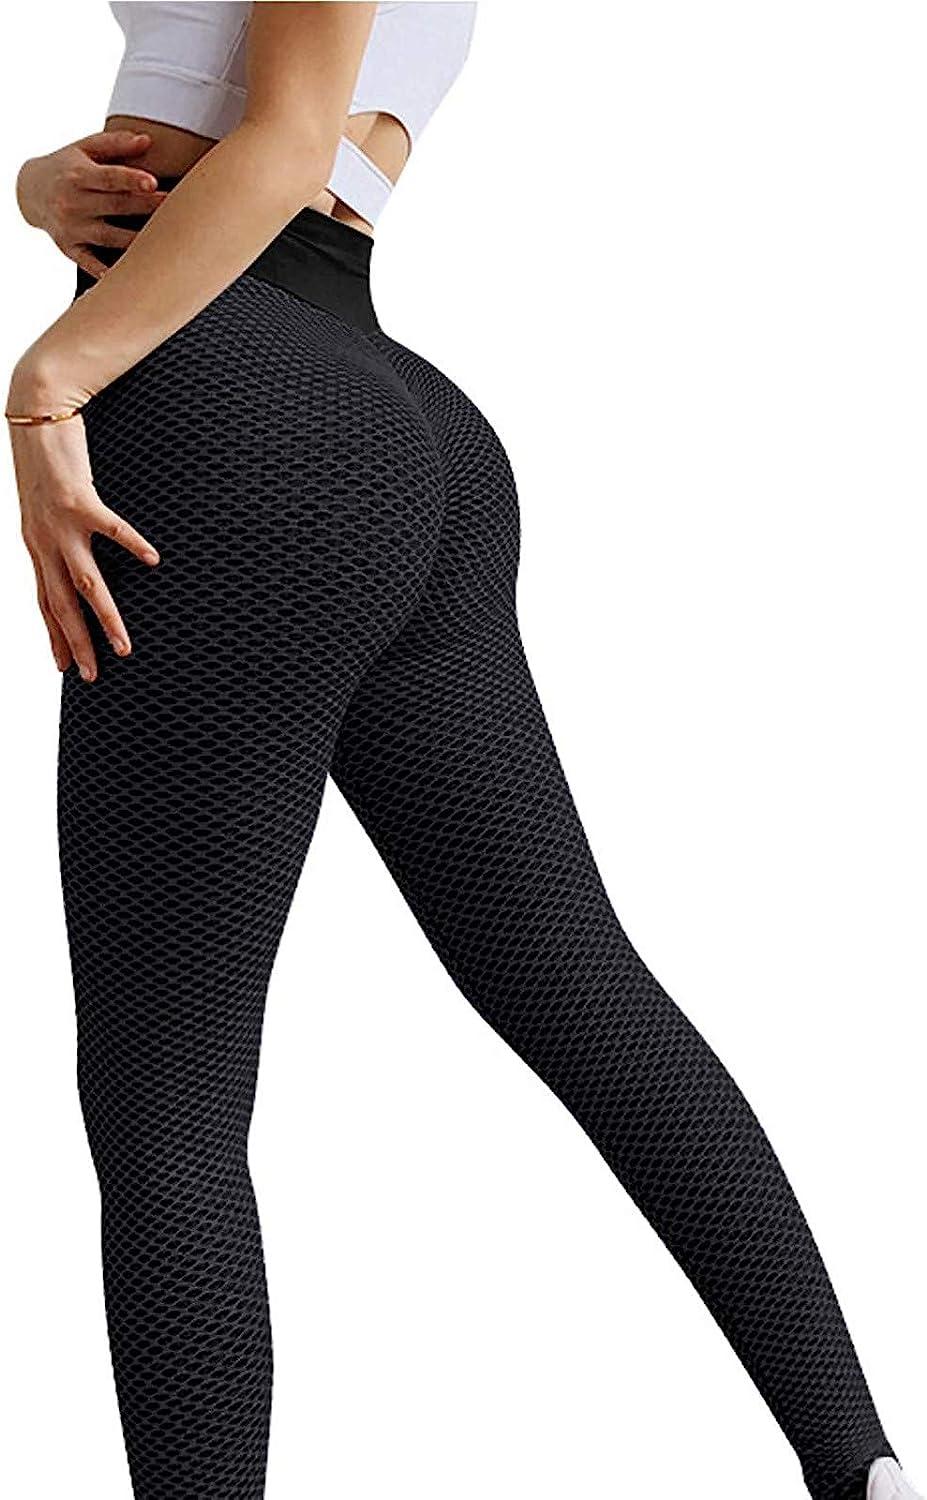 Women's High Waist Ruched Yoga Pants Tummy Control Textured Butt Lifting  Workout Leggings Stretchy Booty Scrunch Tights (Black, X-Large) 